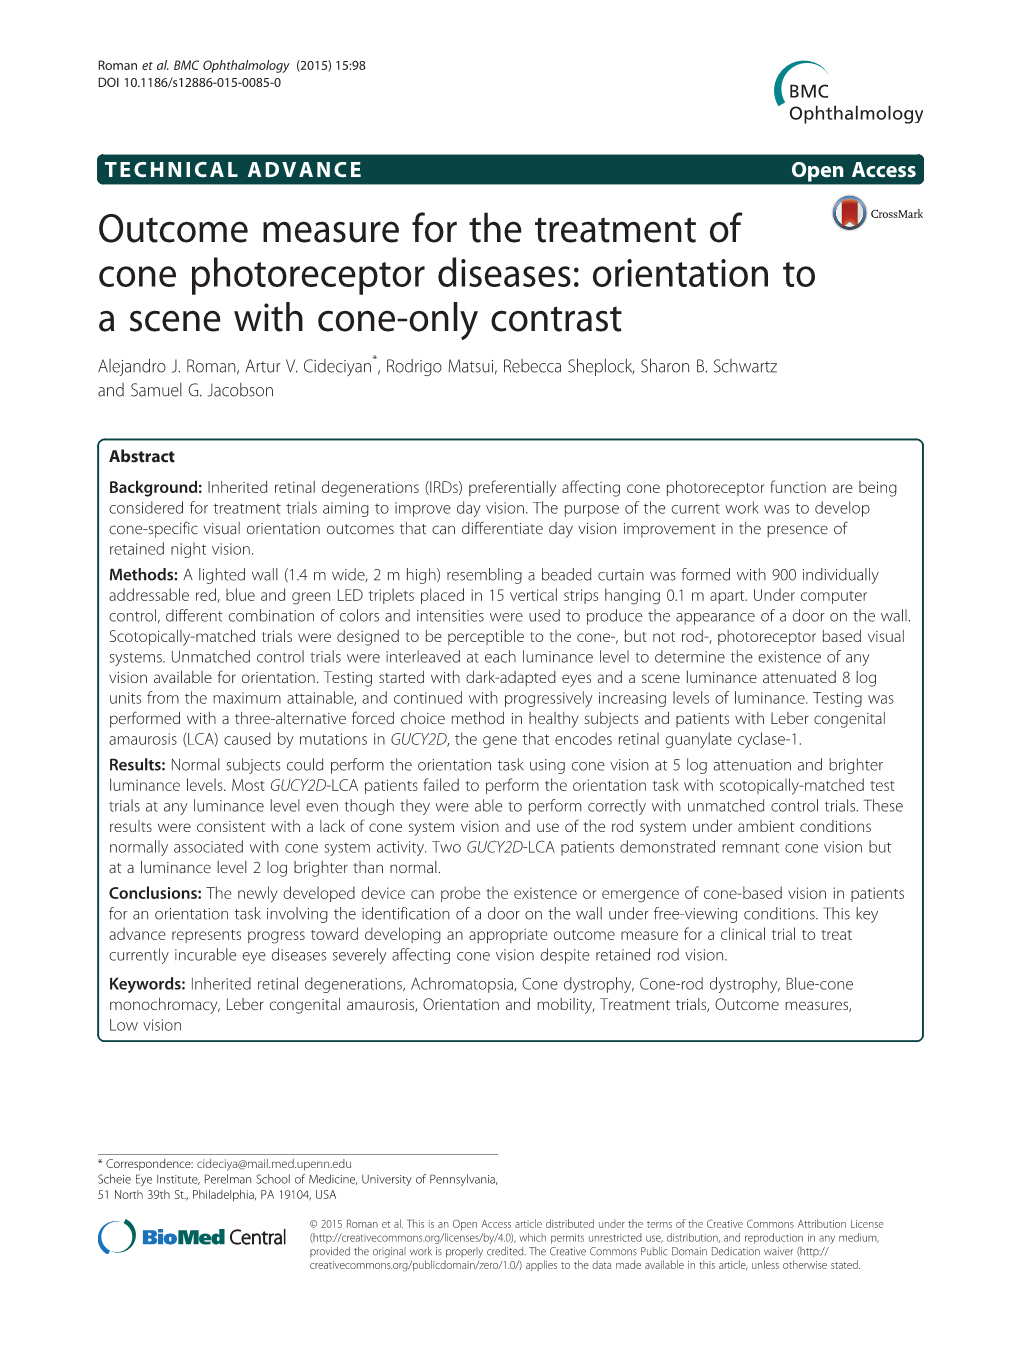 Outcome Measure for the Treatment of Cone Photoreceptor Diseases: Orientation to a Scene with Cone-Only Contrast Alejandro J